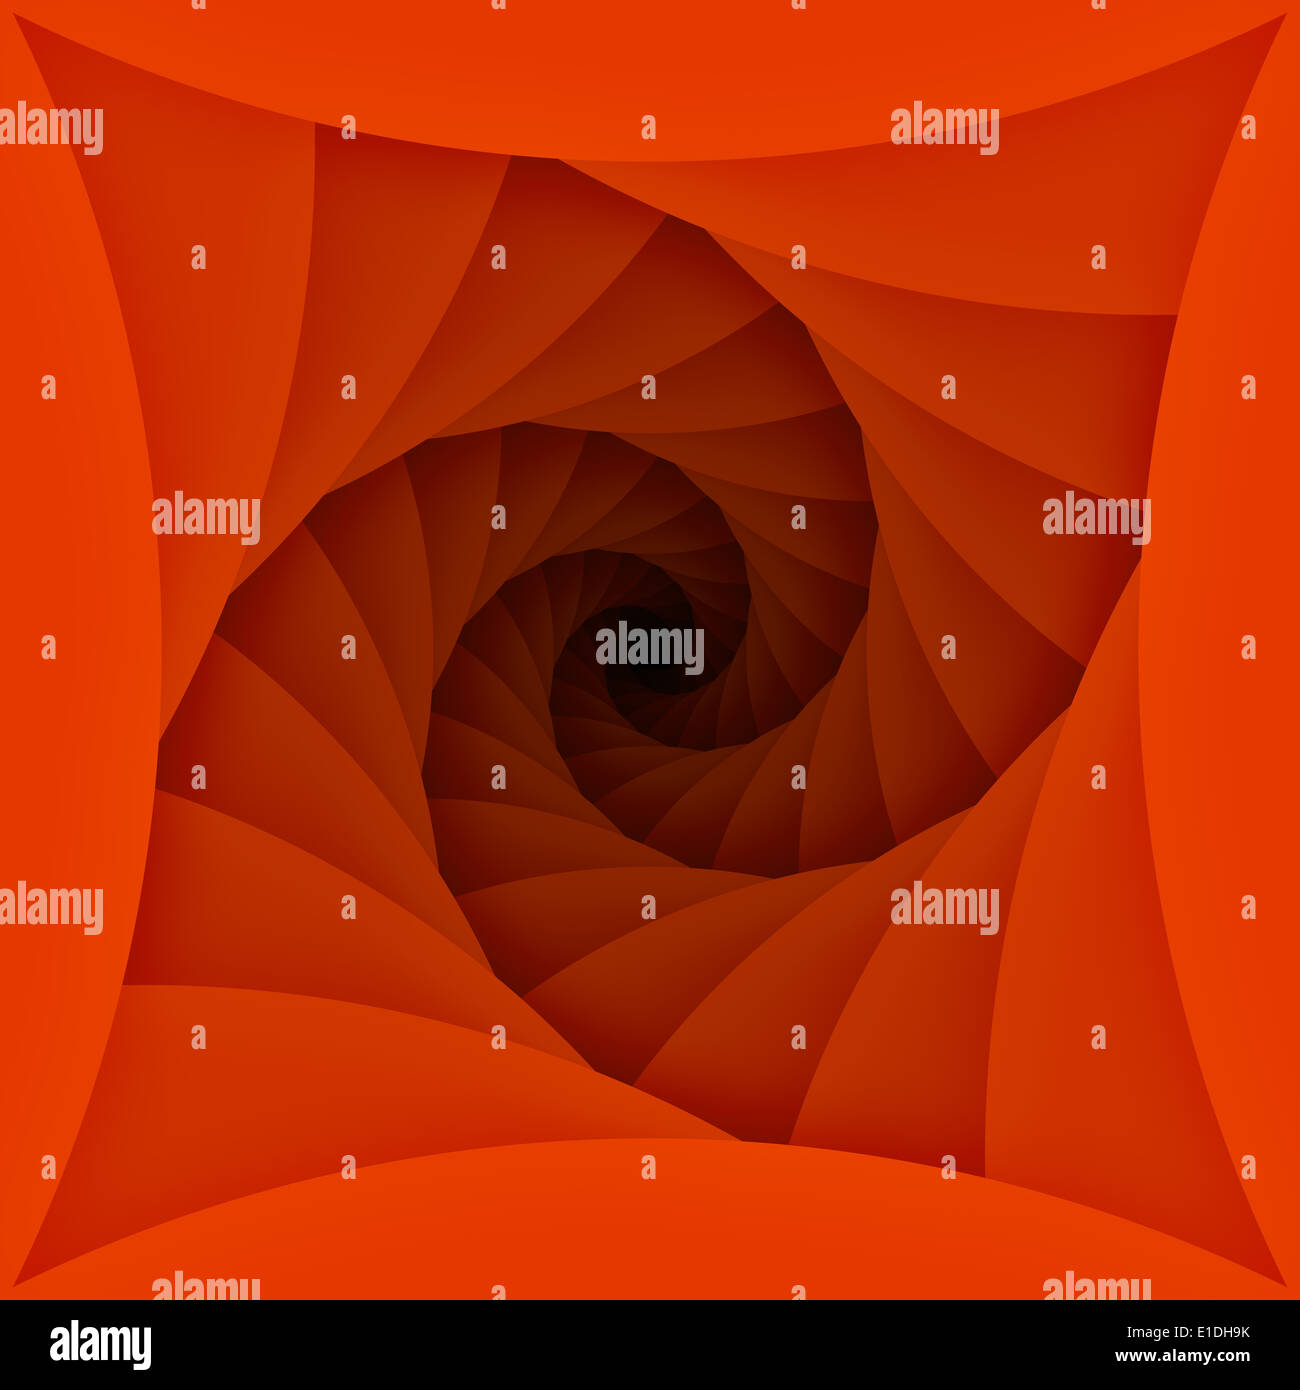 Computer generated graphic design of tunnel blades spiral pattern Stock Photo